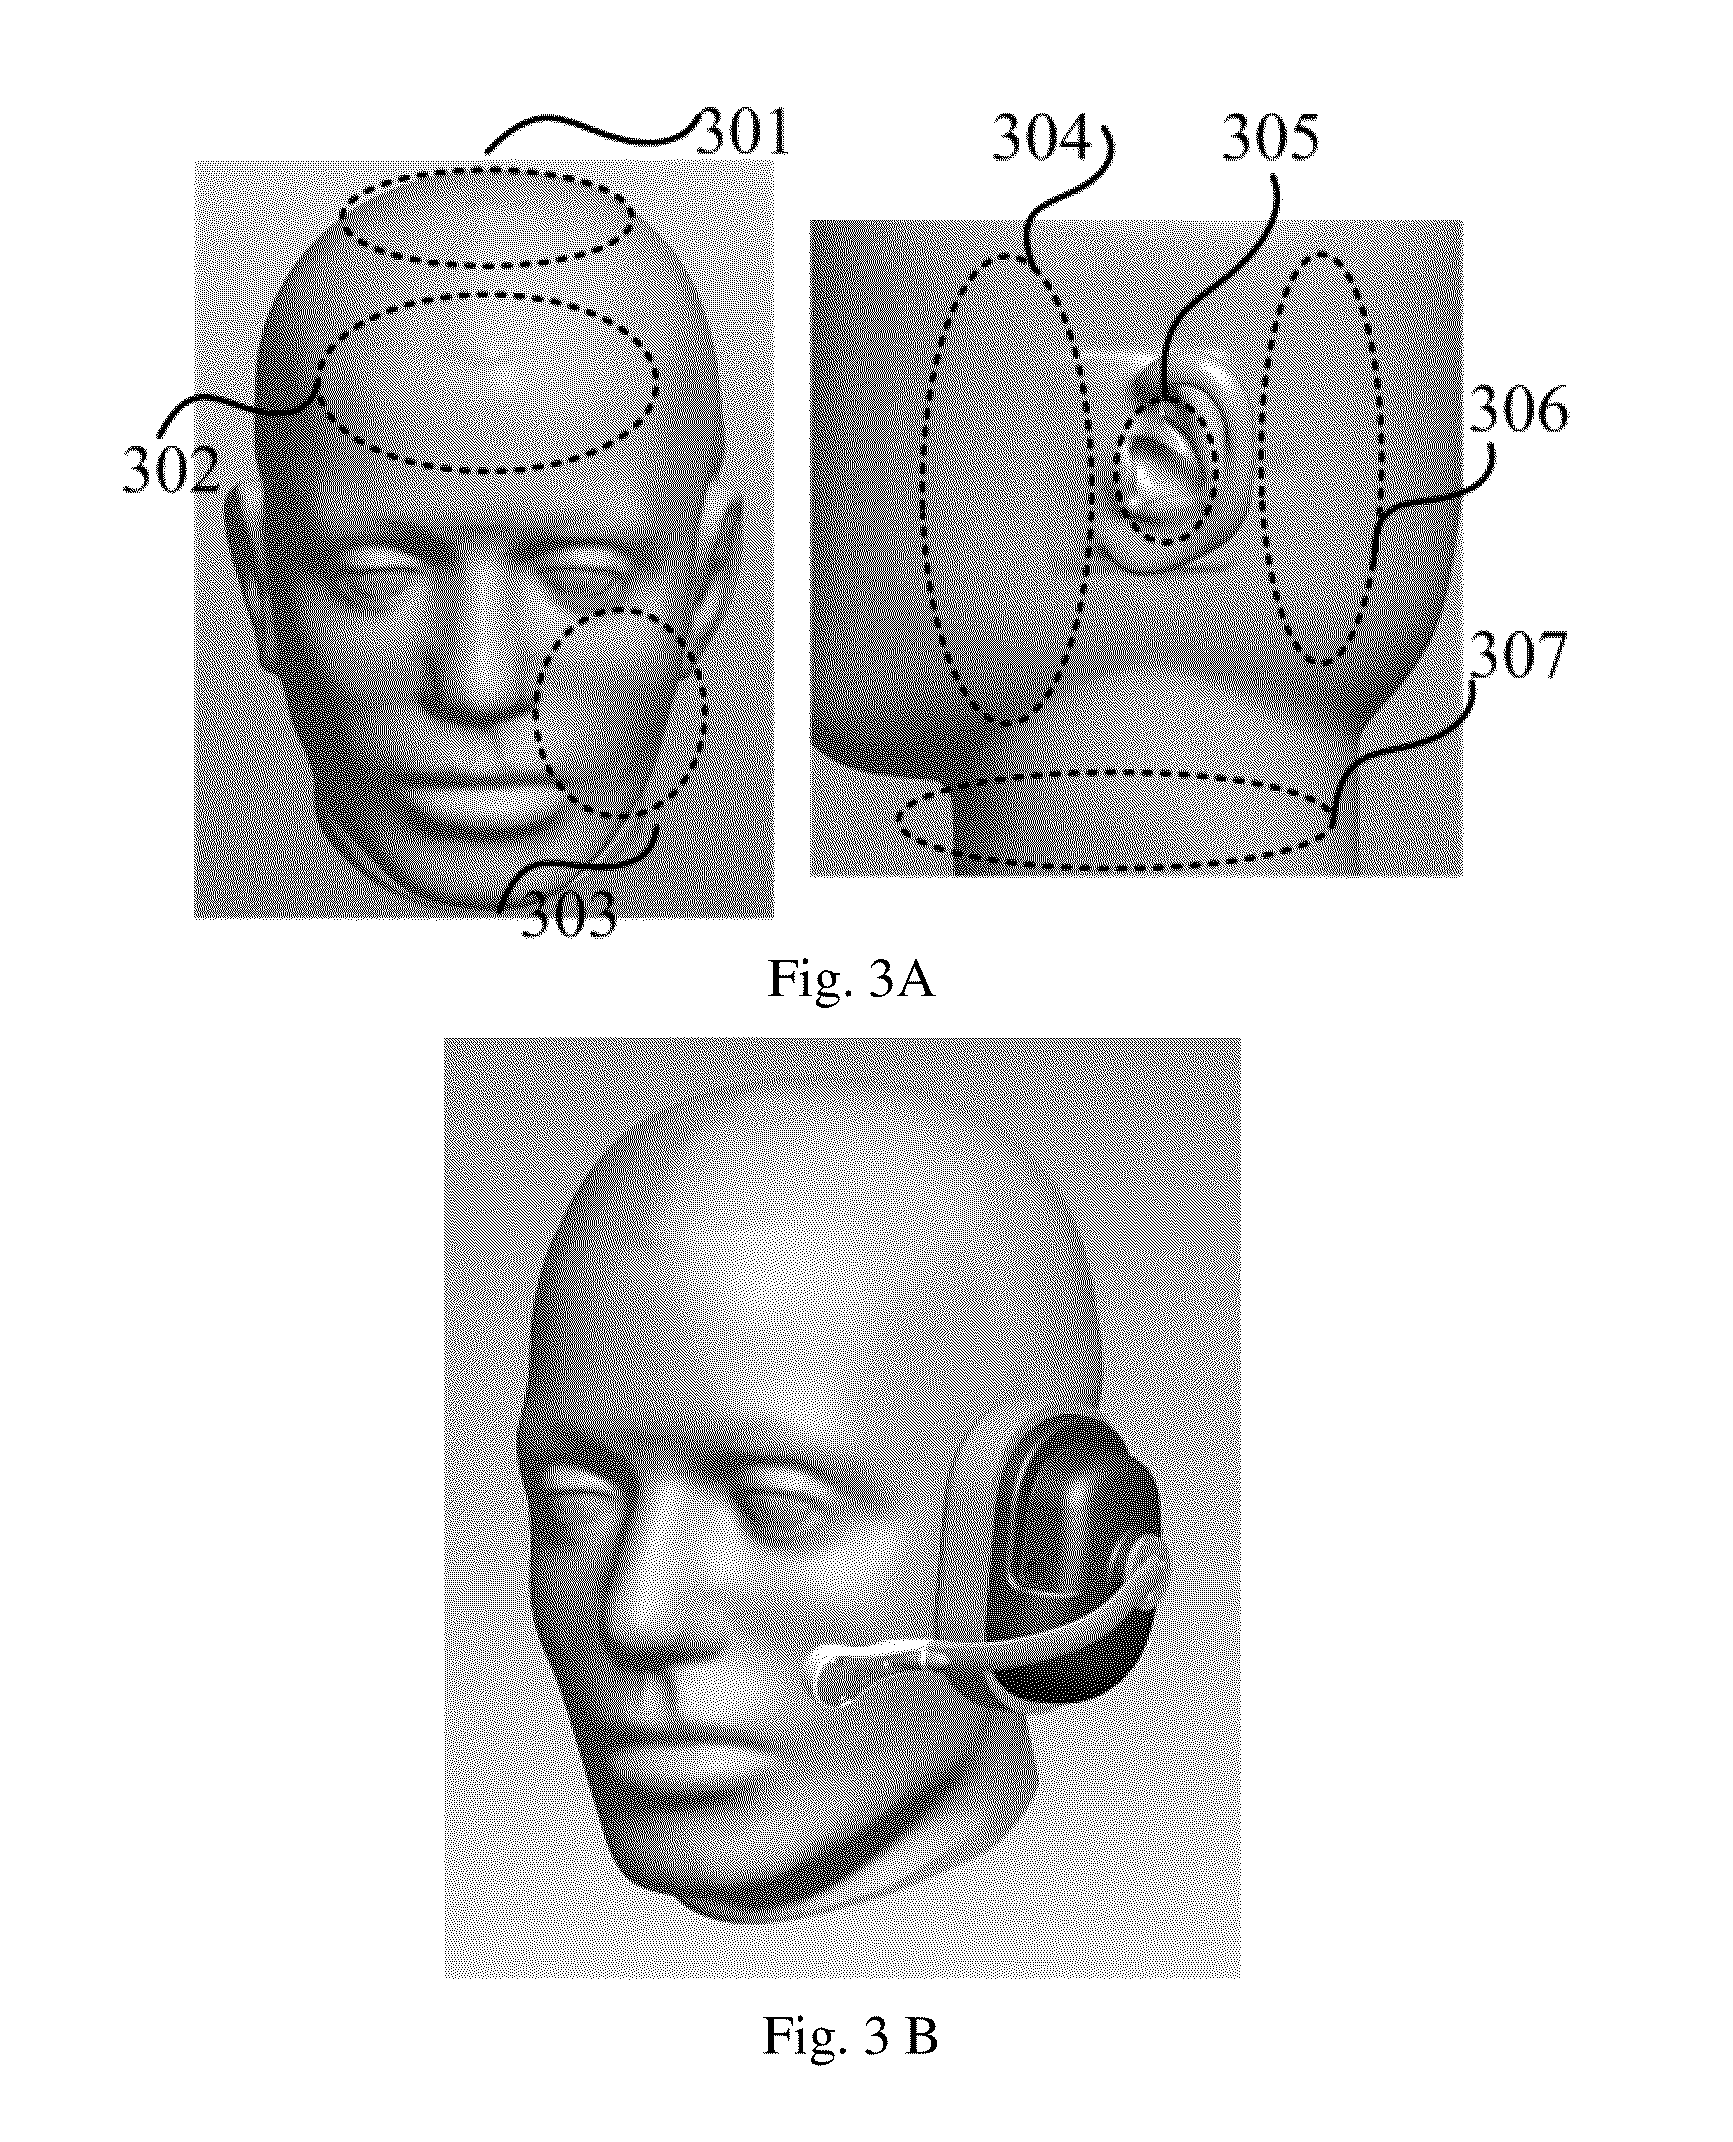 Speech enhancing method and device, and nenoising communication headphone enhancing method and device, and denoising communication headphones